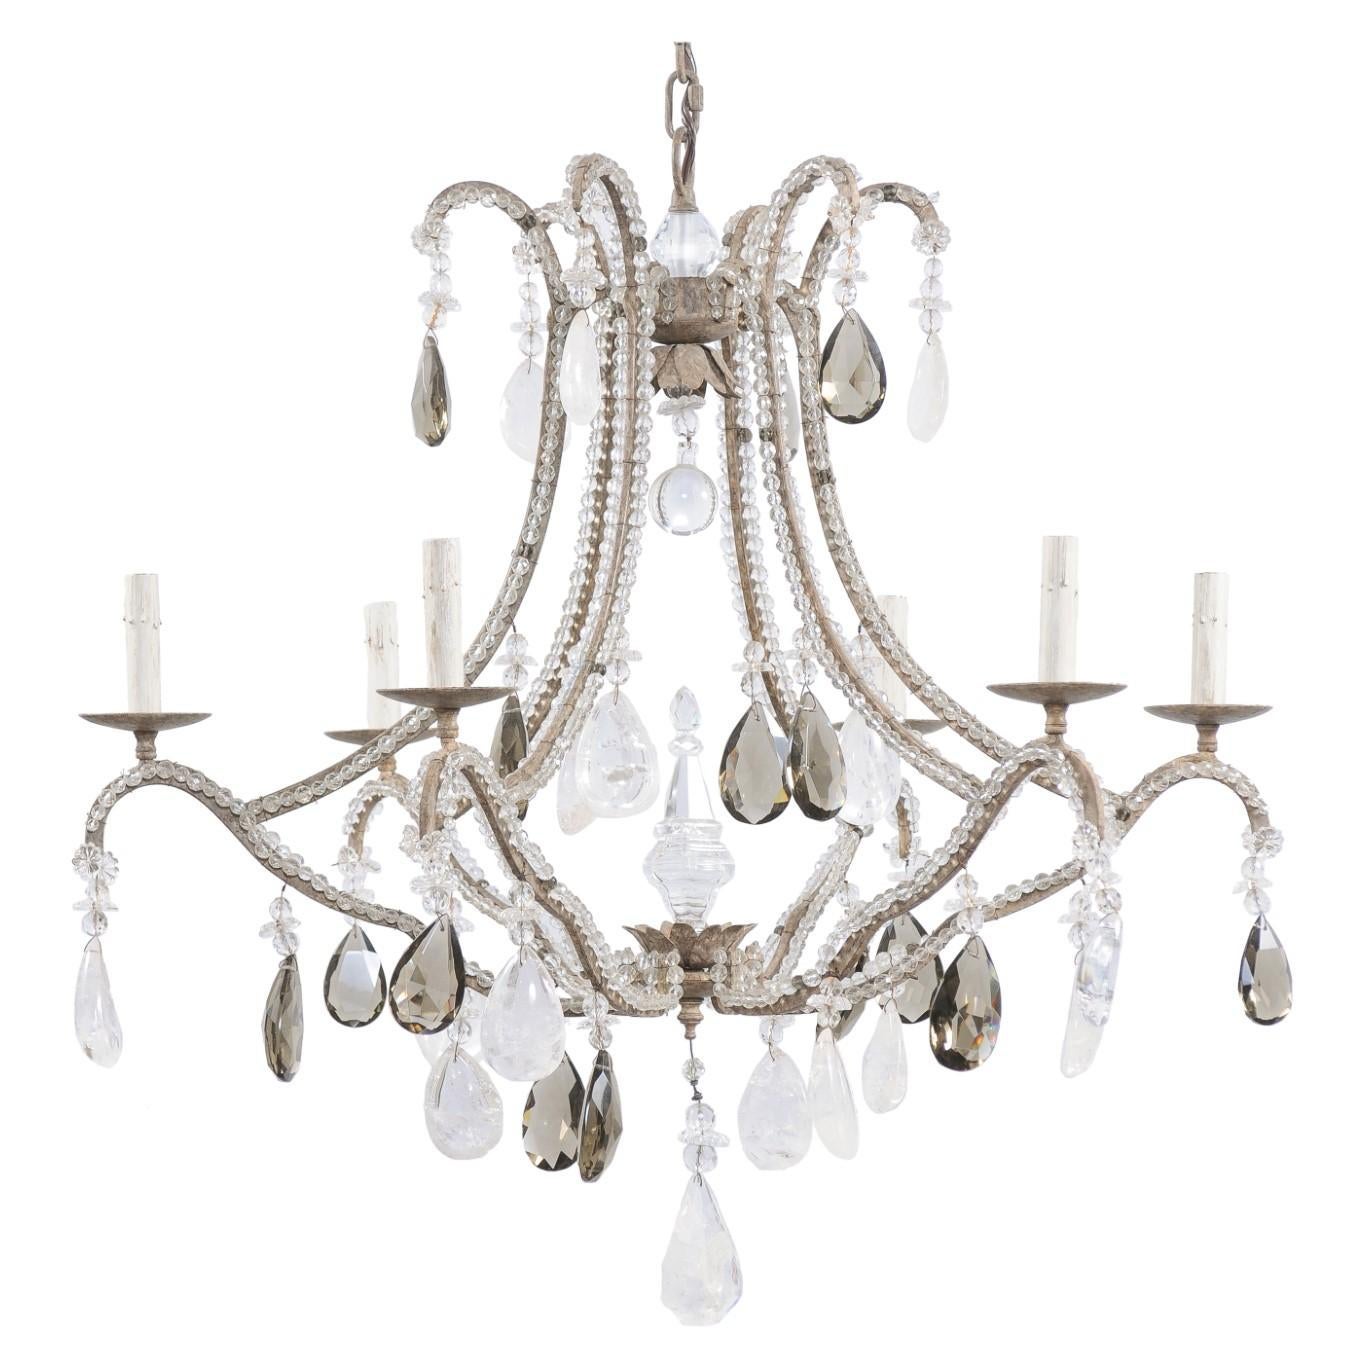 Vintage Six-Light Chandelier W/Waterfall Top, Adorn in Smoky & Rock Crystals For Sale